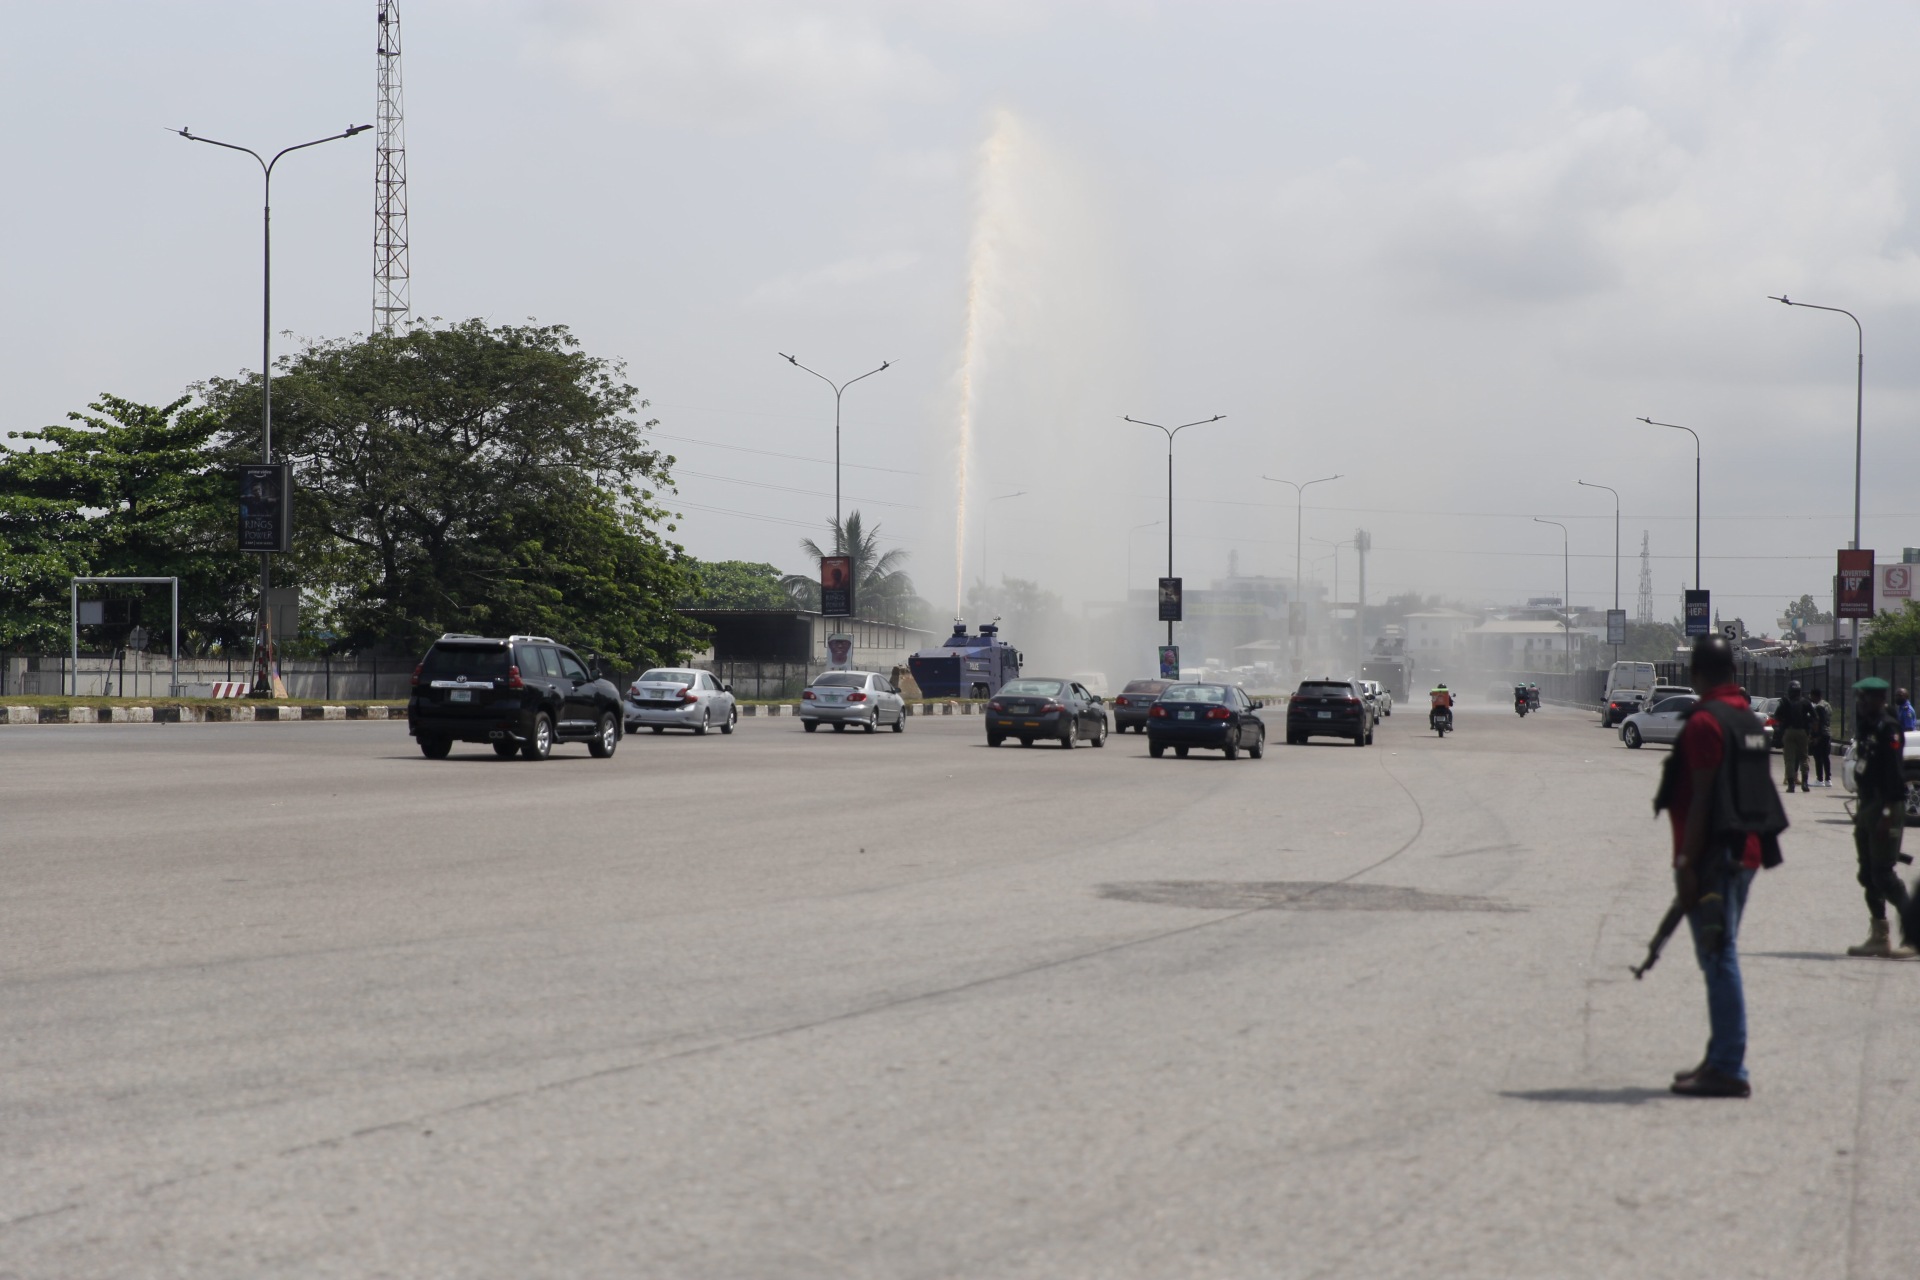 The moment police deploy water cannons to disperse peaceful protest